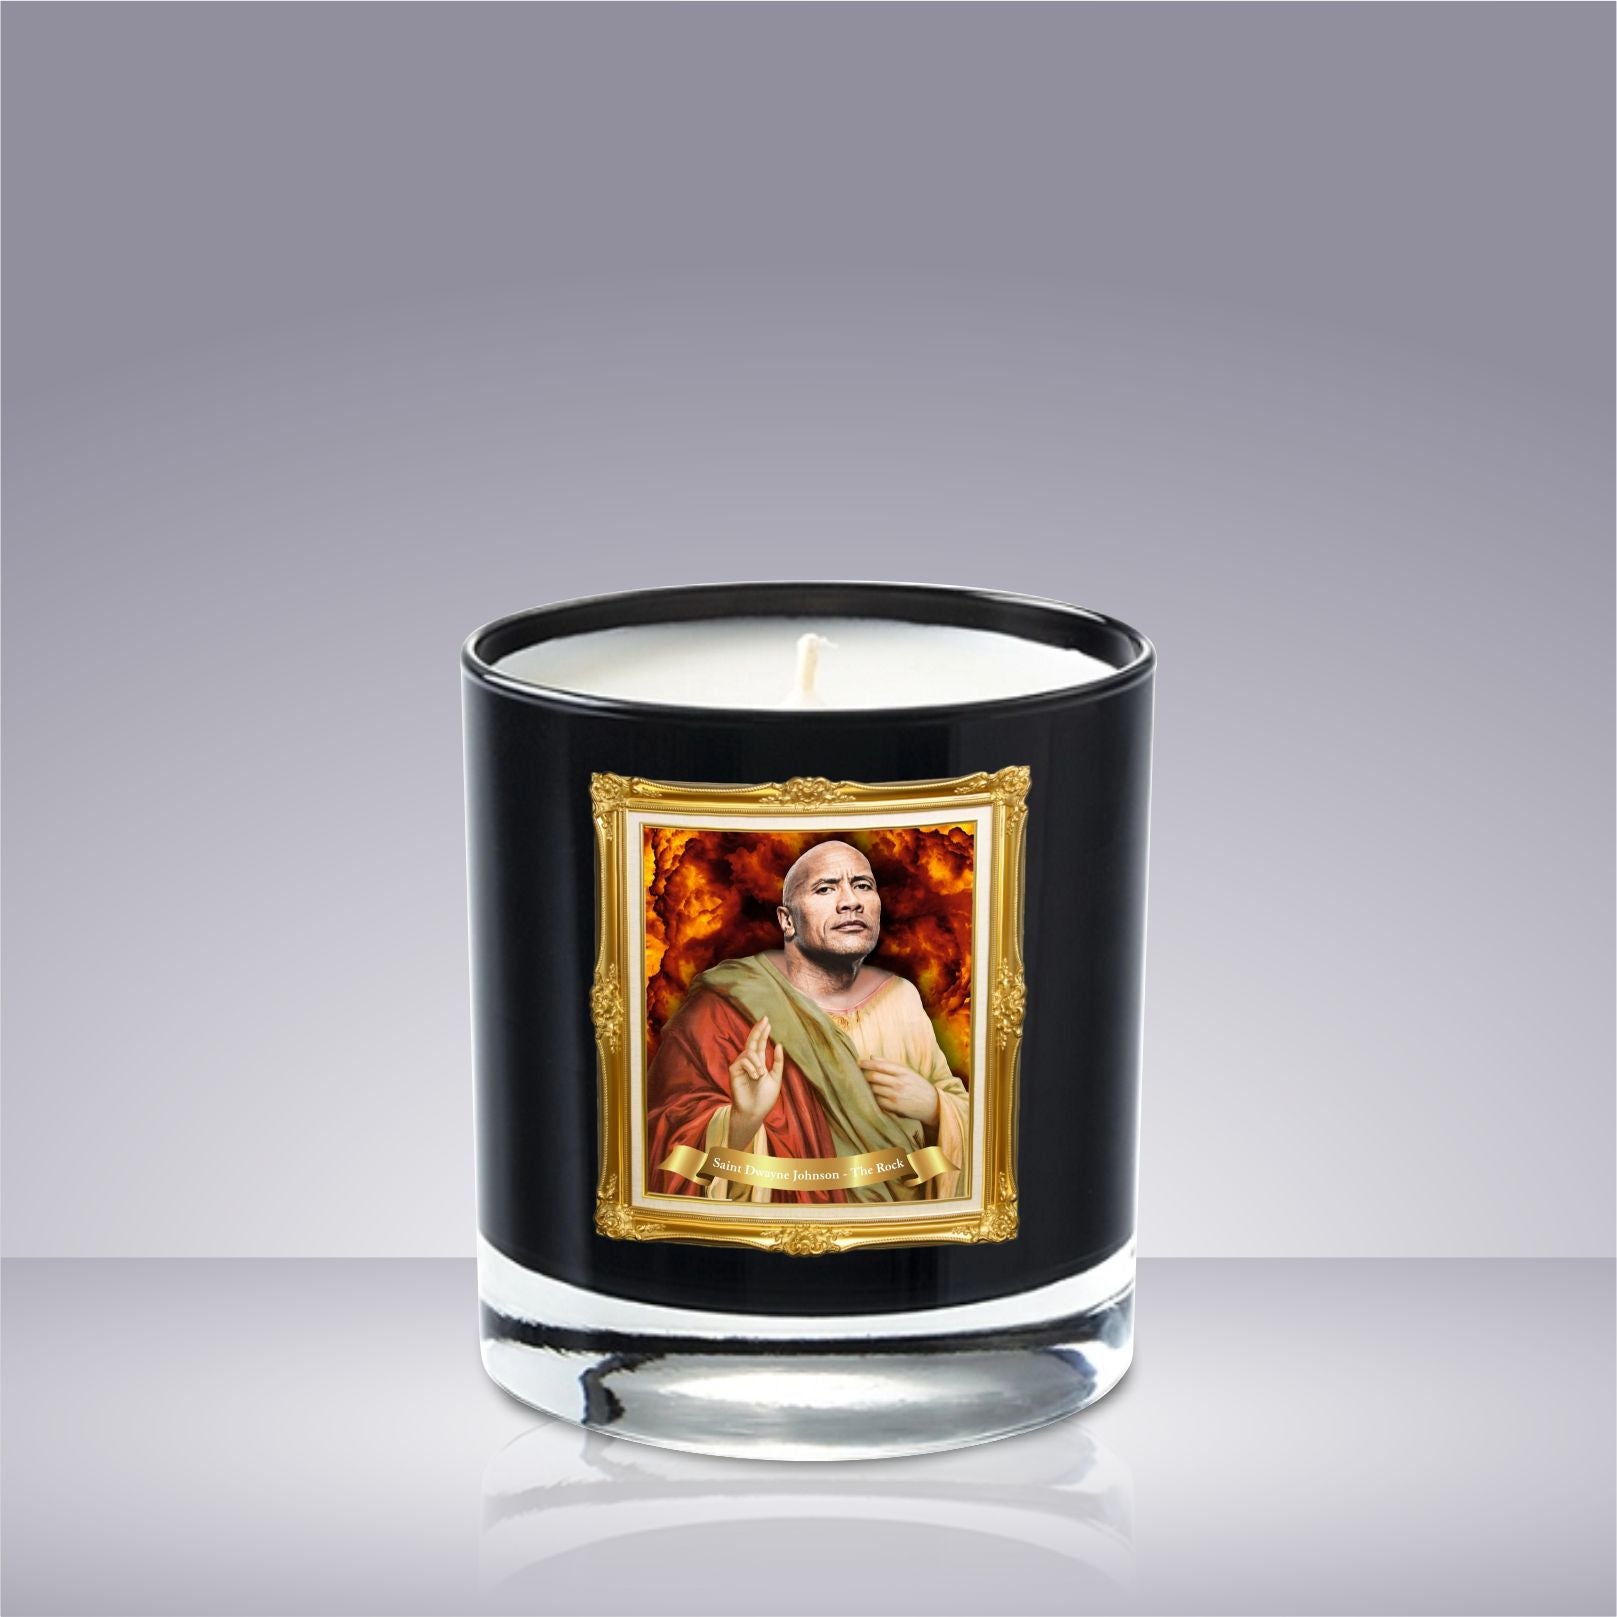 The Rock Novelty Celebrity Scented Prayer Candle